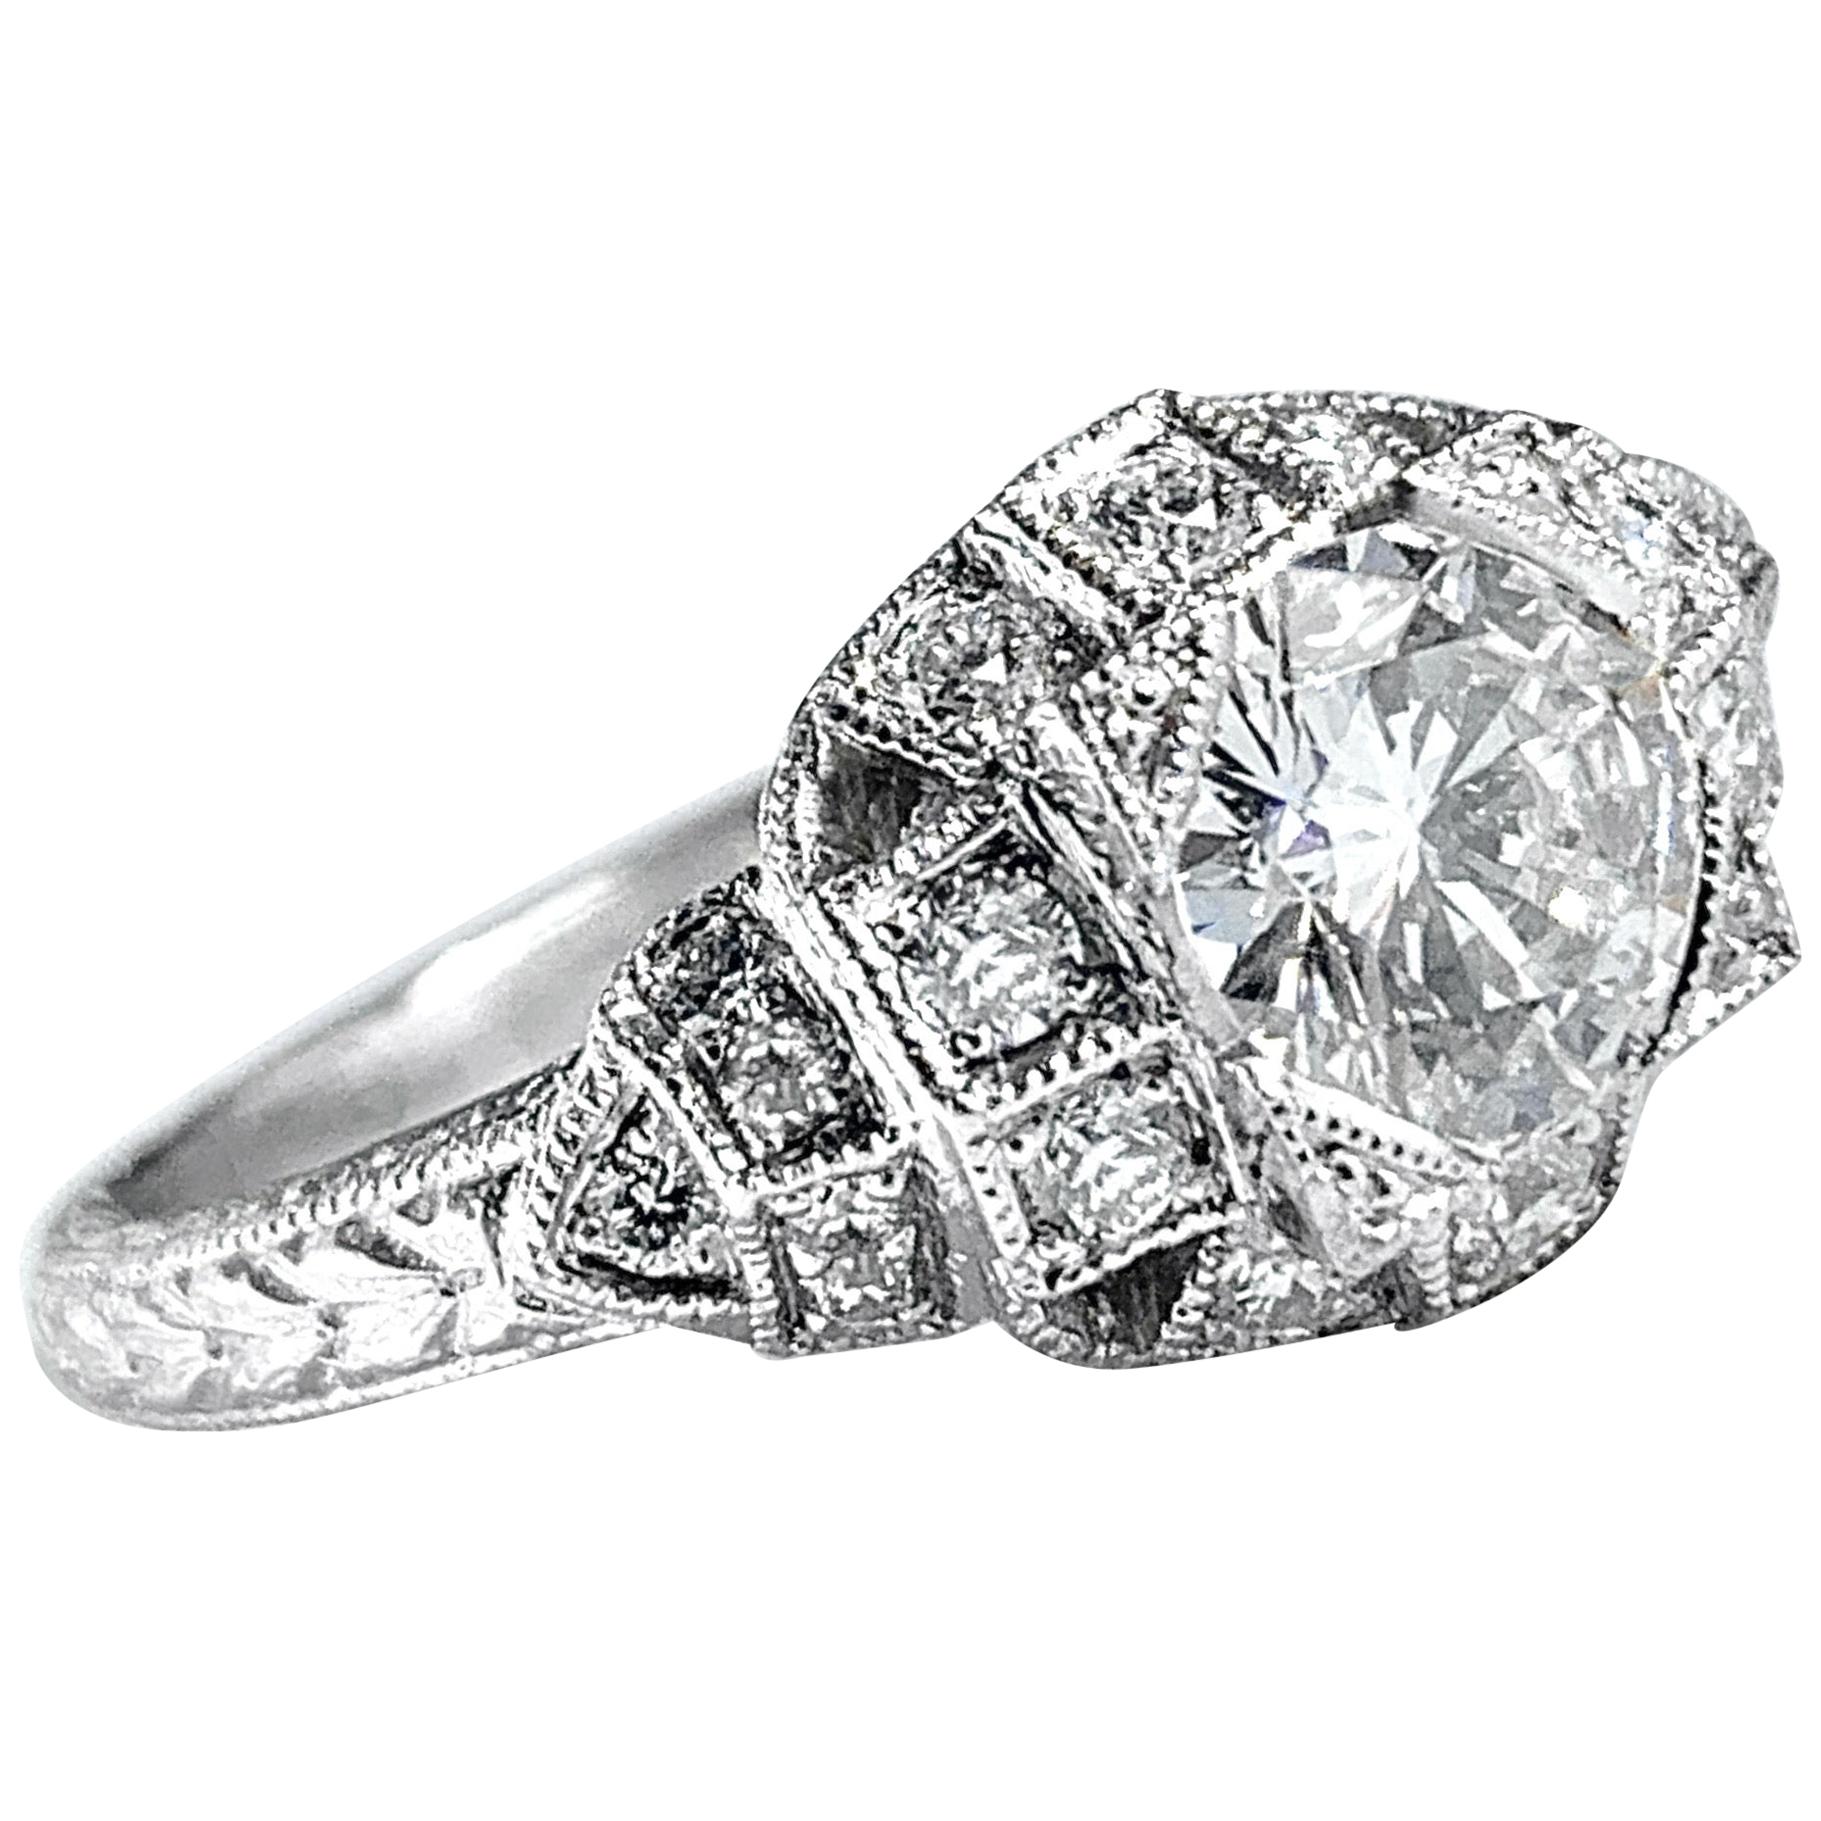 0.77 Carat Certified Diamond in Platinum "Layer Cake" Engagement Ring For Sale